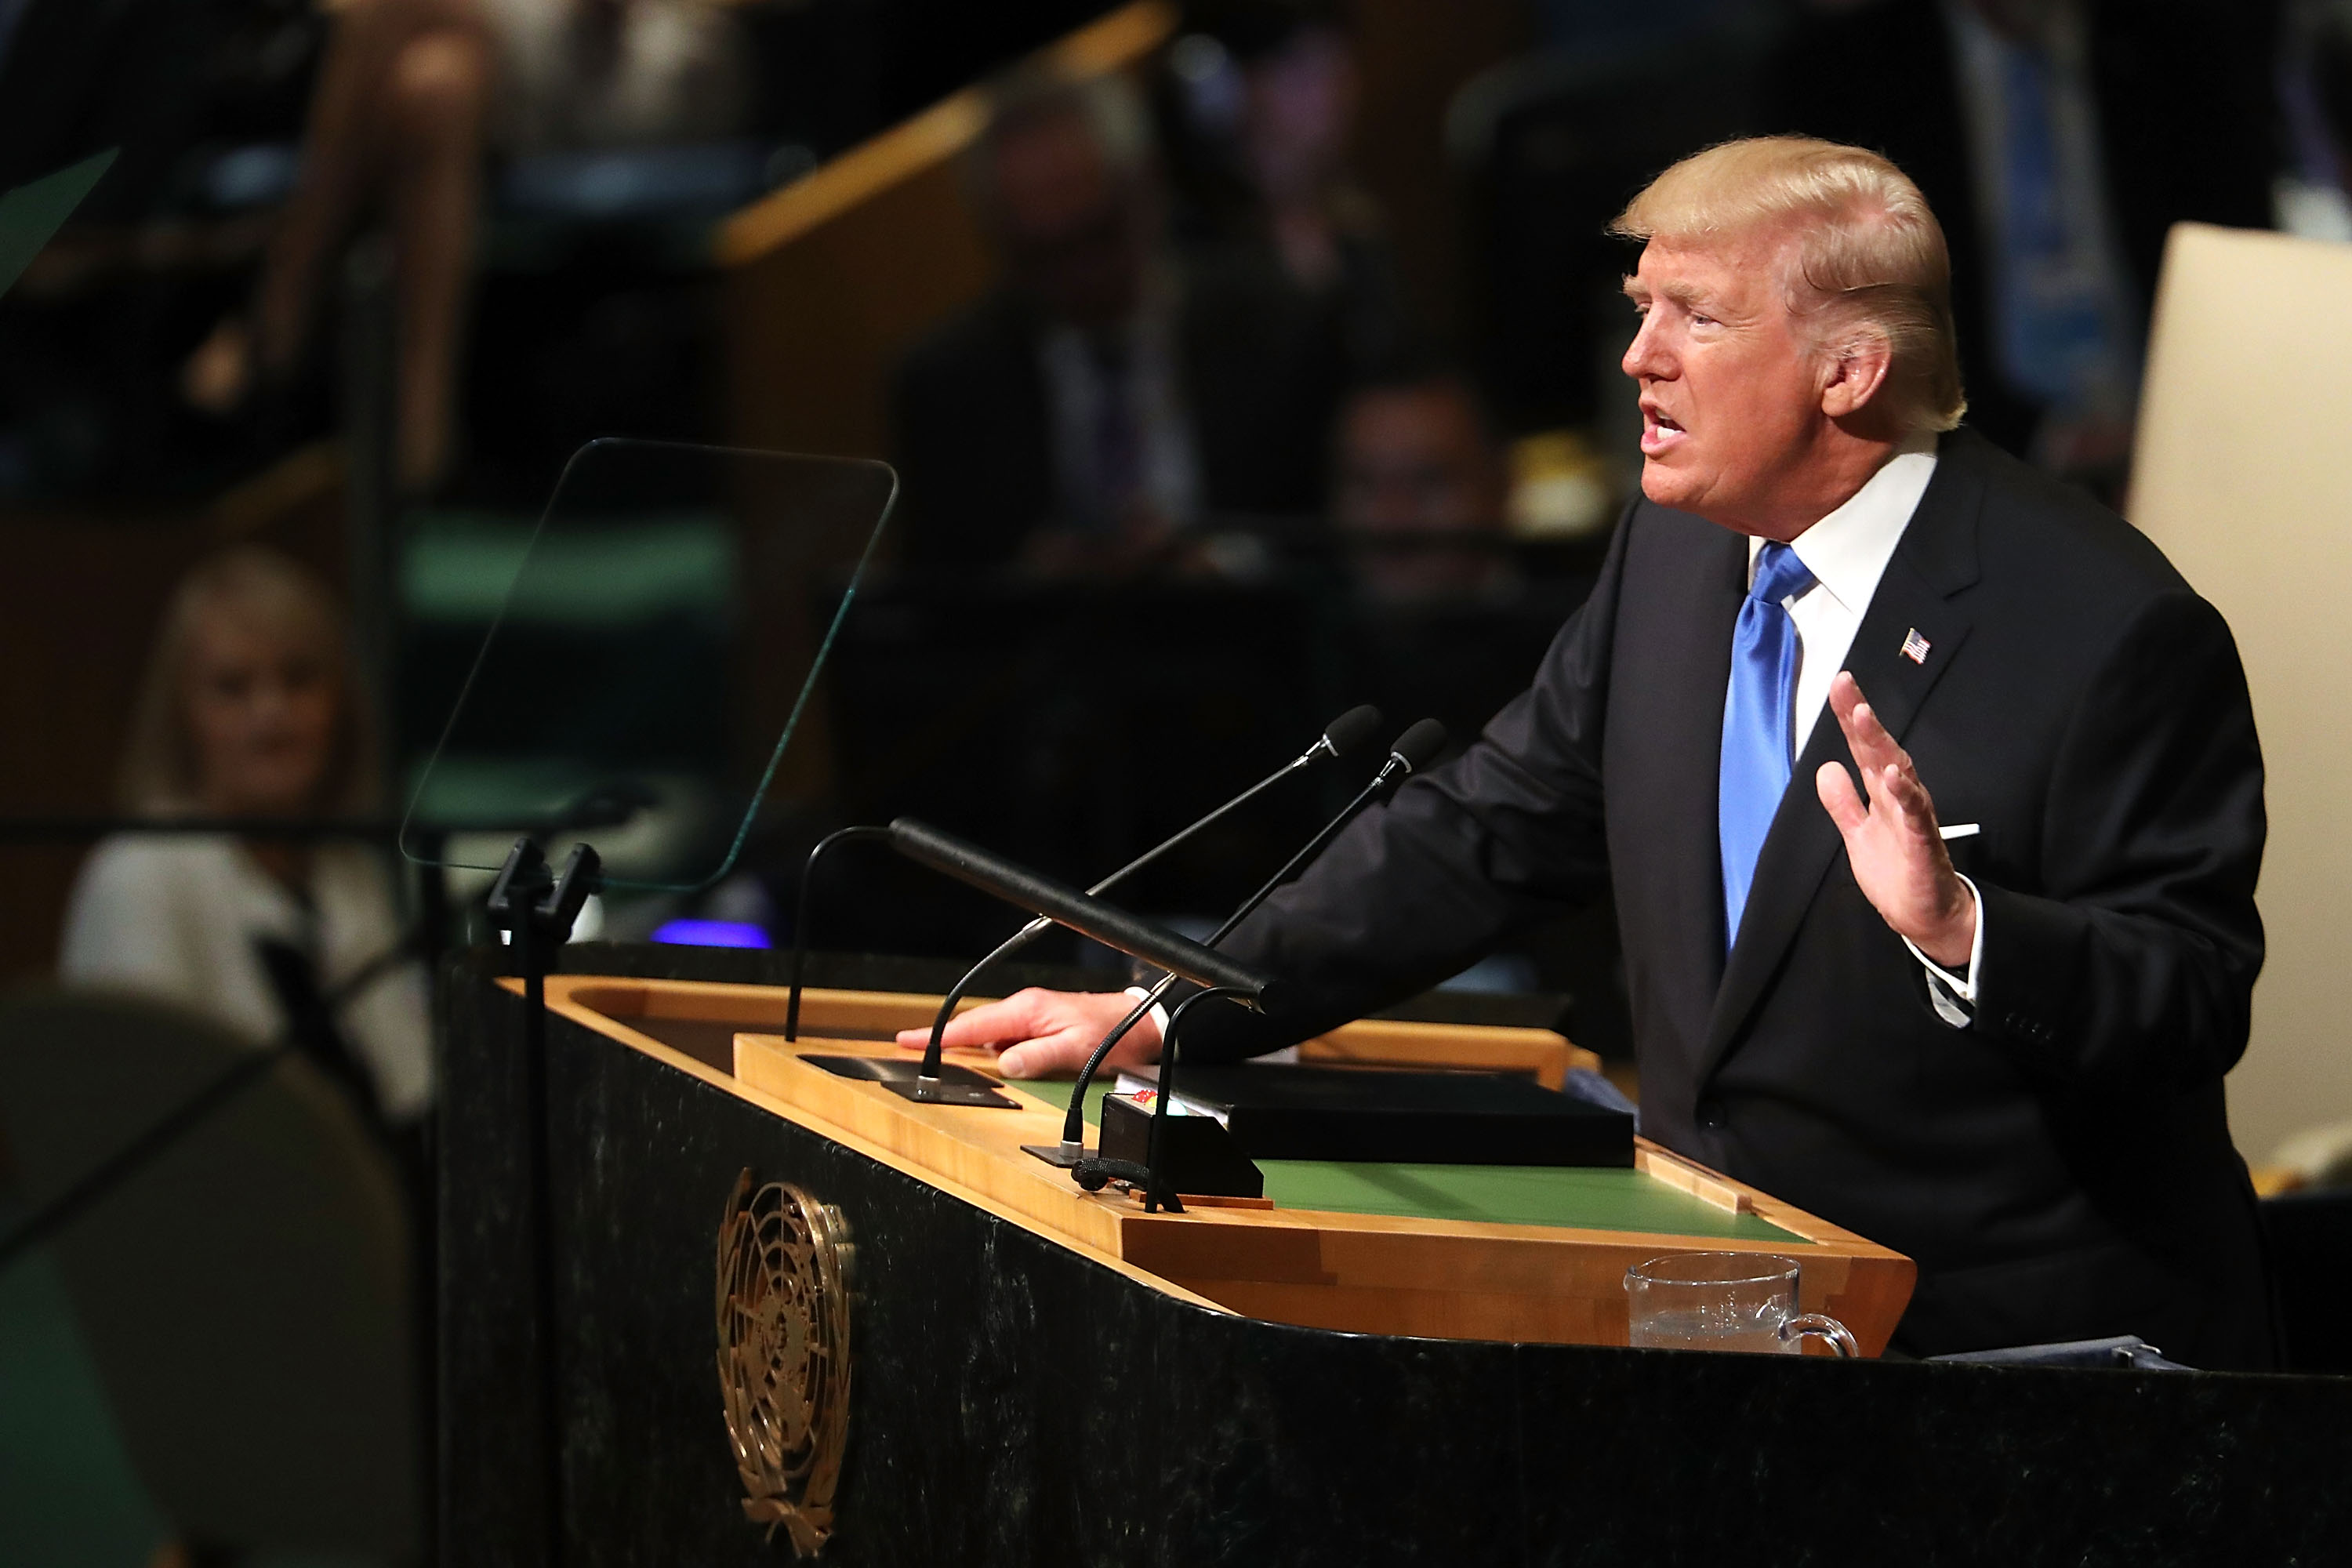 President Trump speaks at the UN General Assembly